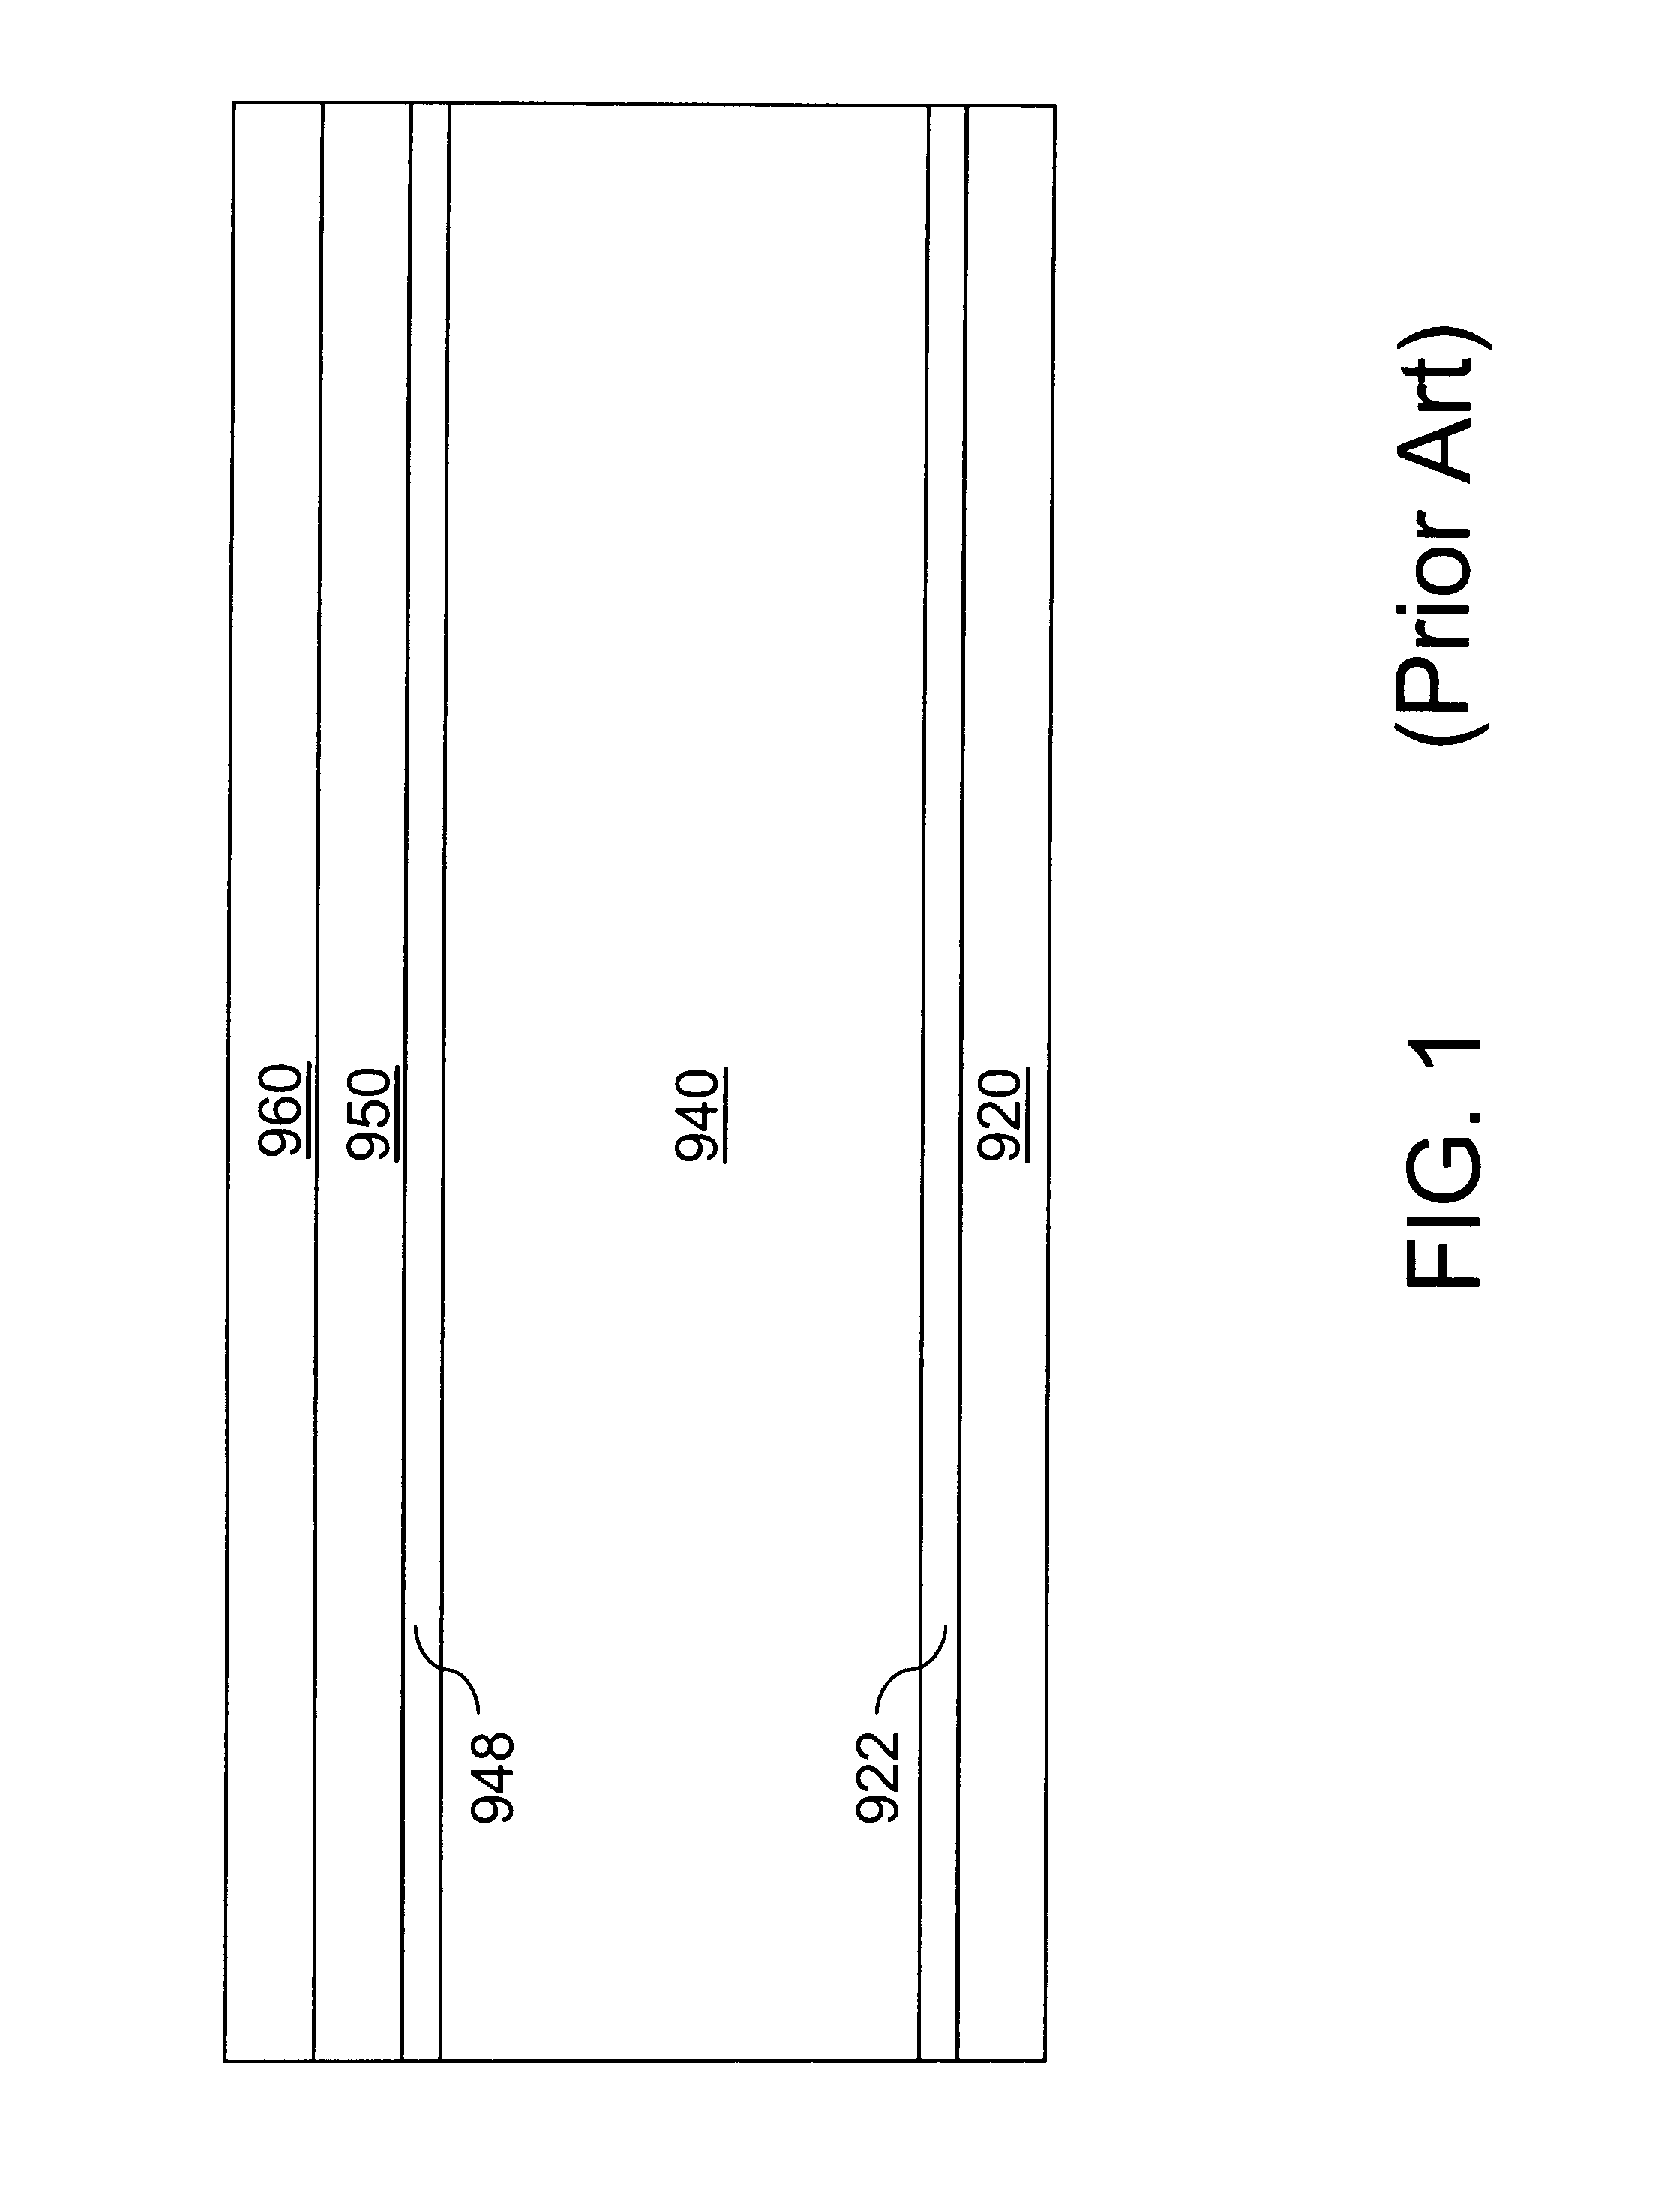 Tungsten liner for aluminum-based electromigration resistant interconnect structure